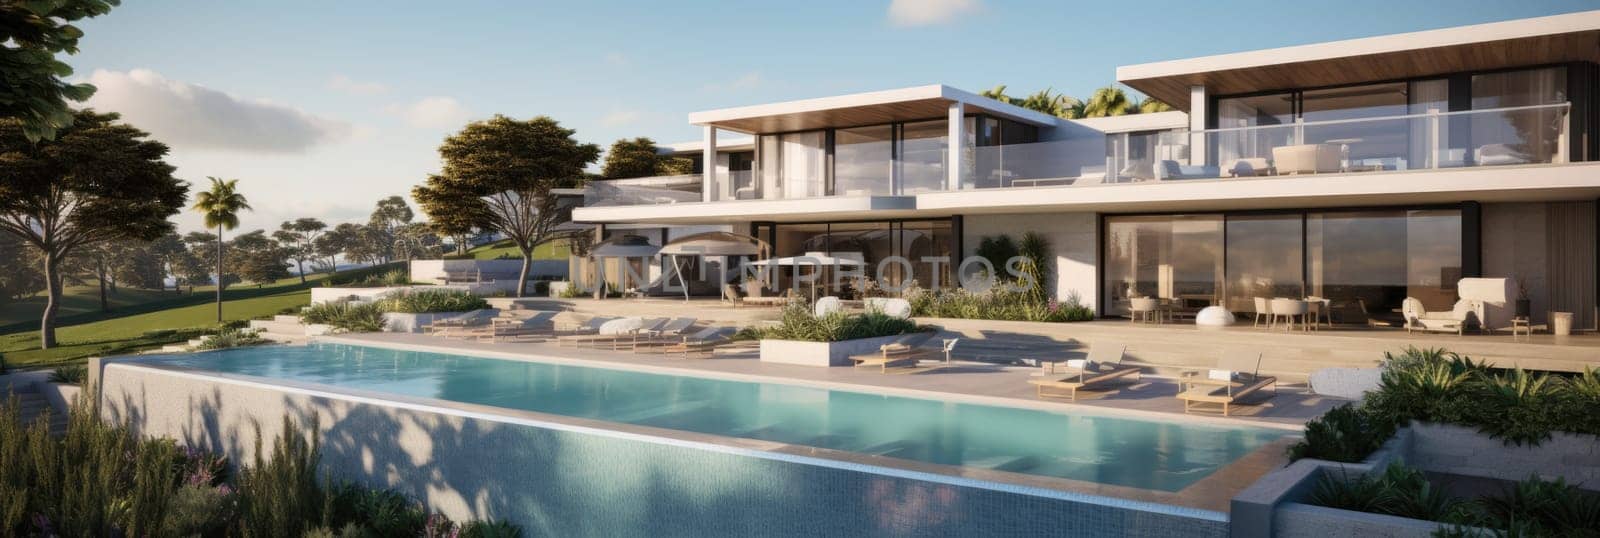 A detailed artists rendering of a luxurious mansion with a stunning swimming pool.